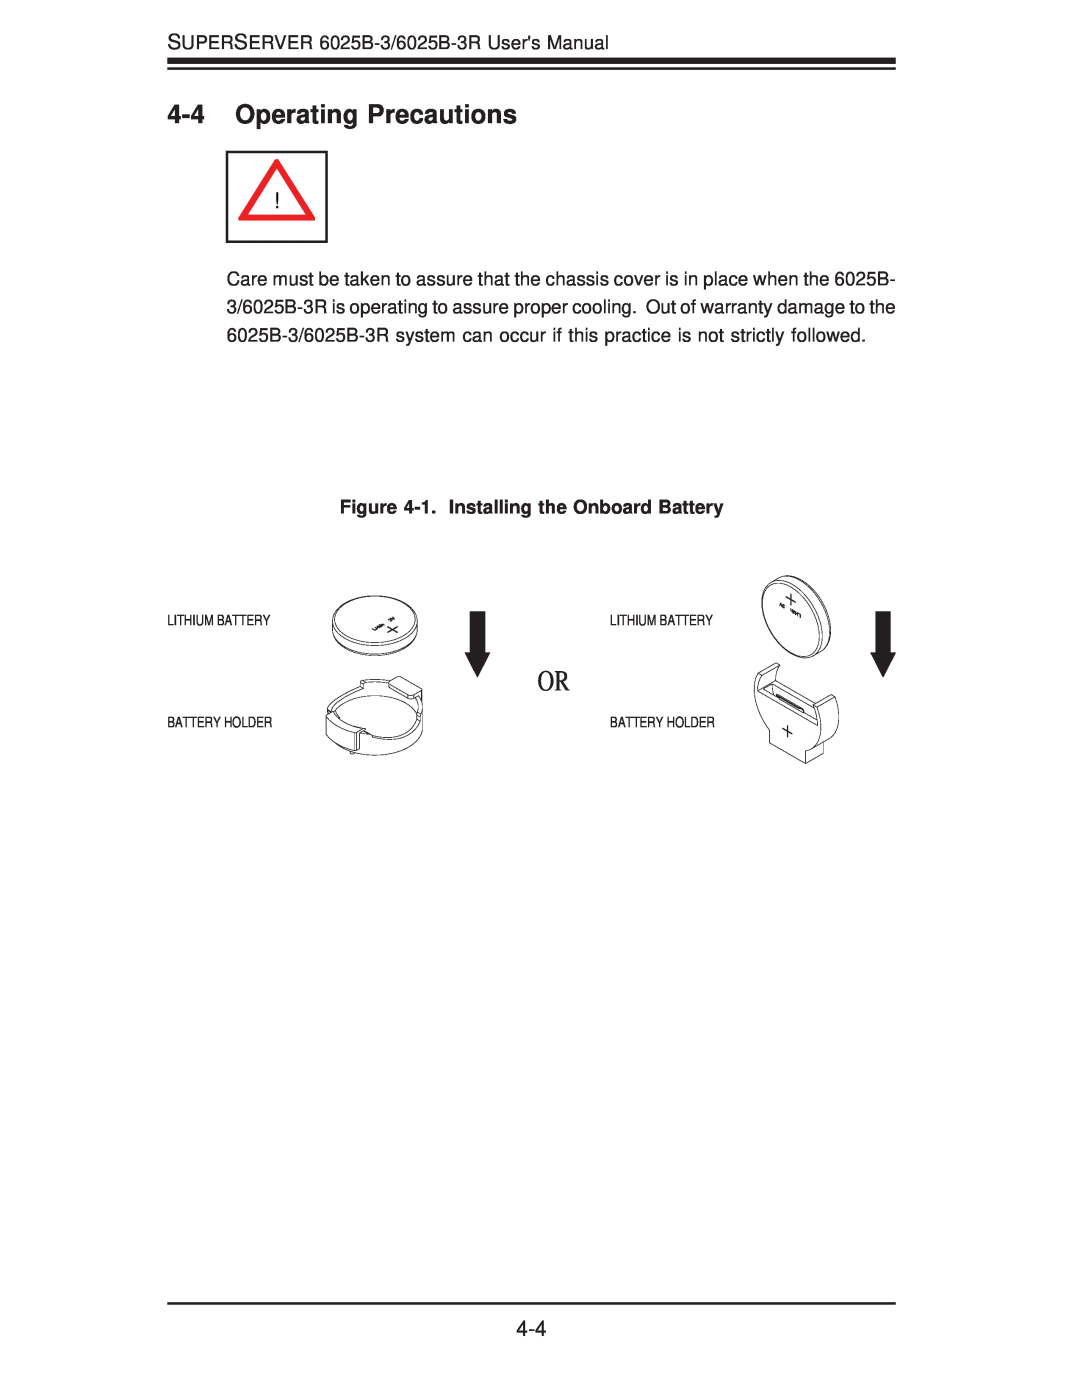 SUPER MICRO Computer 6025B-3R user manual Operating Precautions, 1. Installing the Onboard Battery 